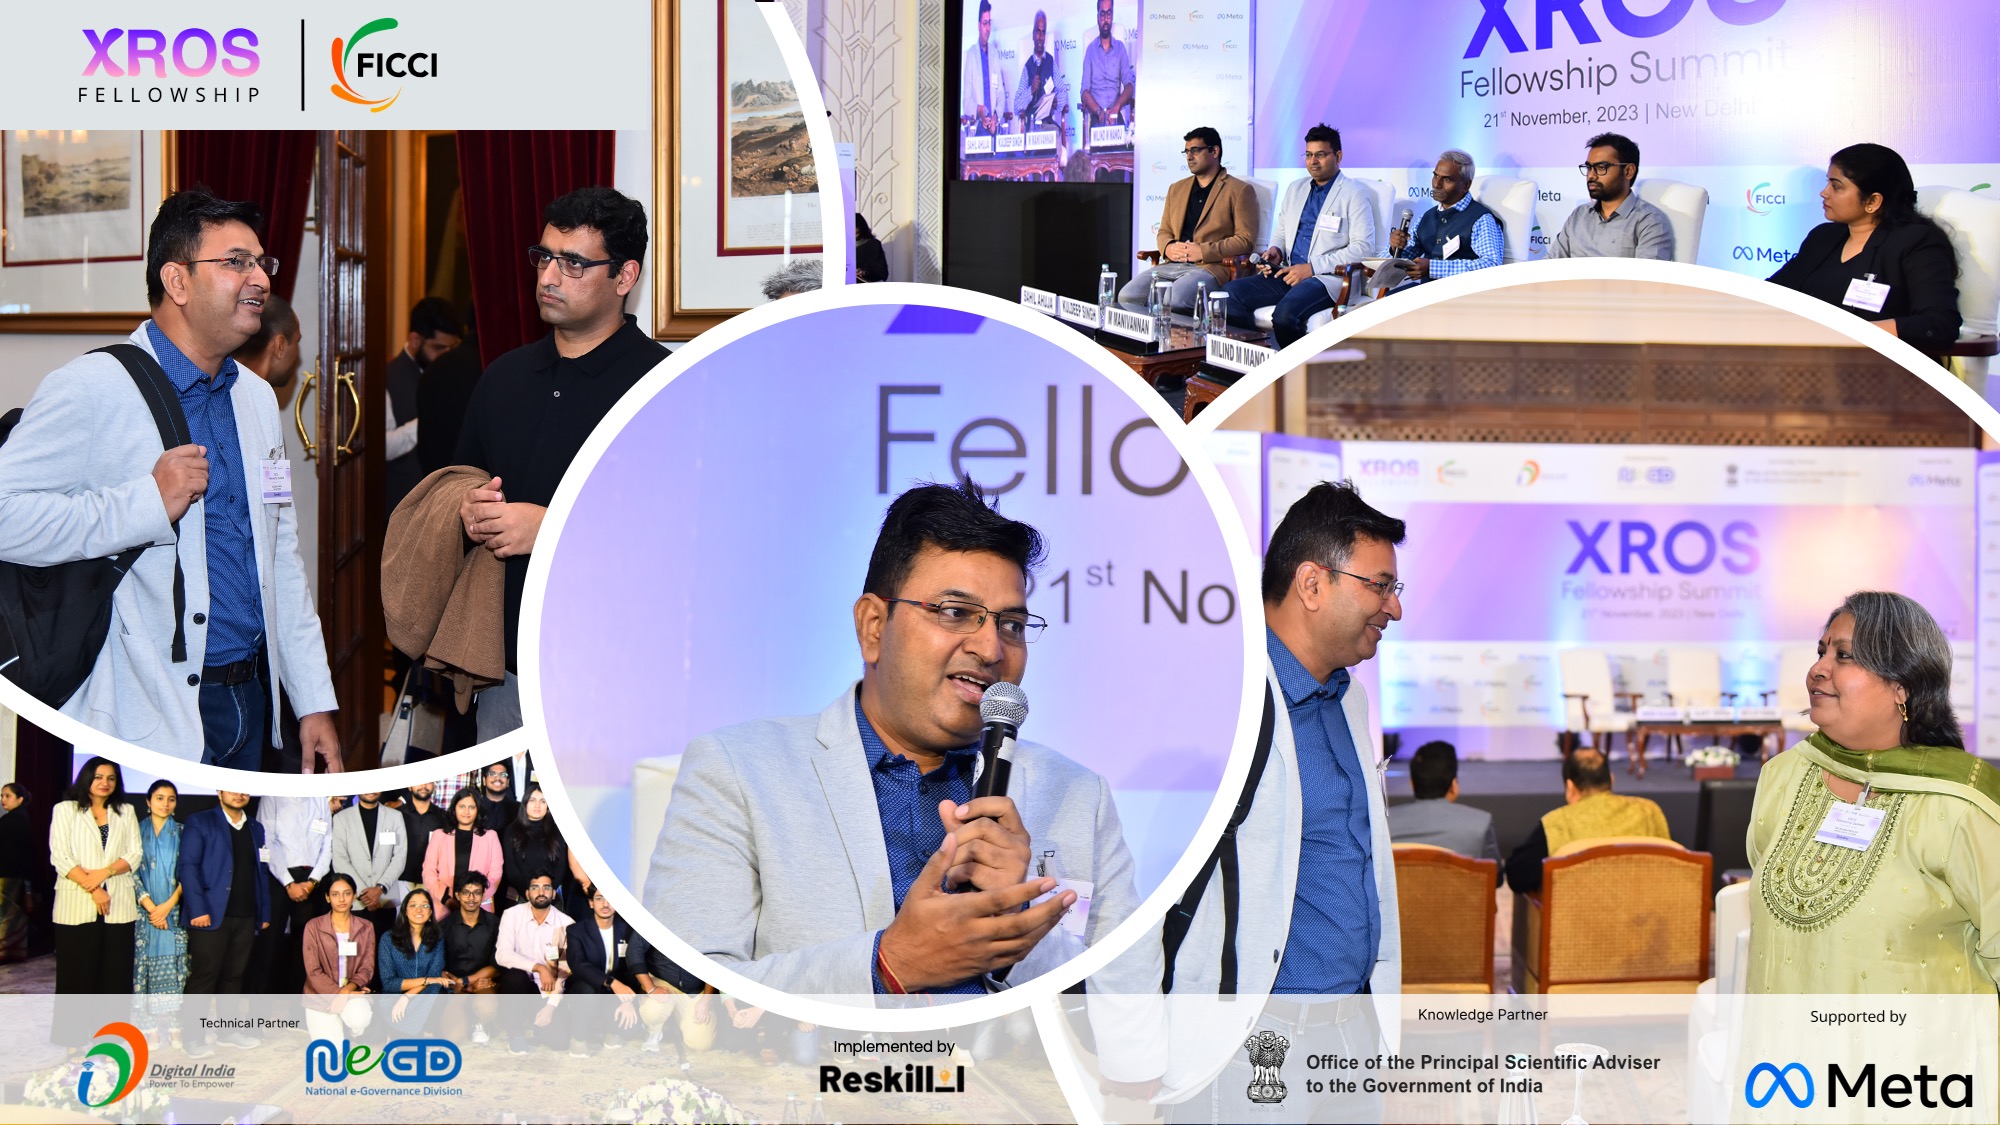 image from Panelist at FICCI XROS Fellowship Summit